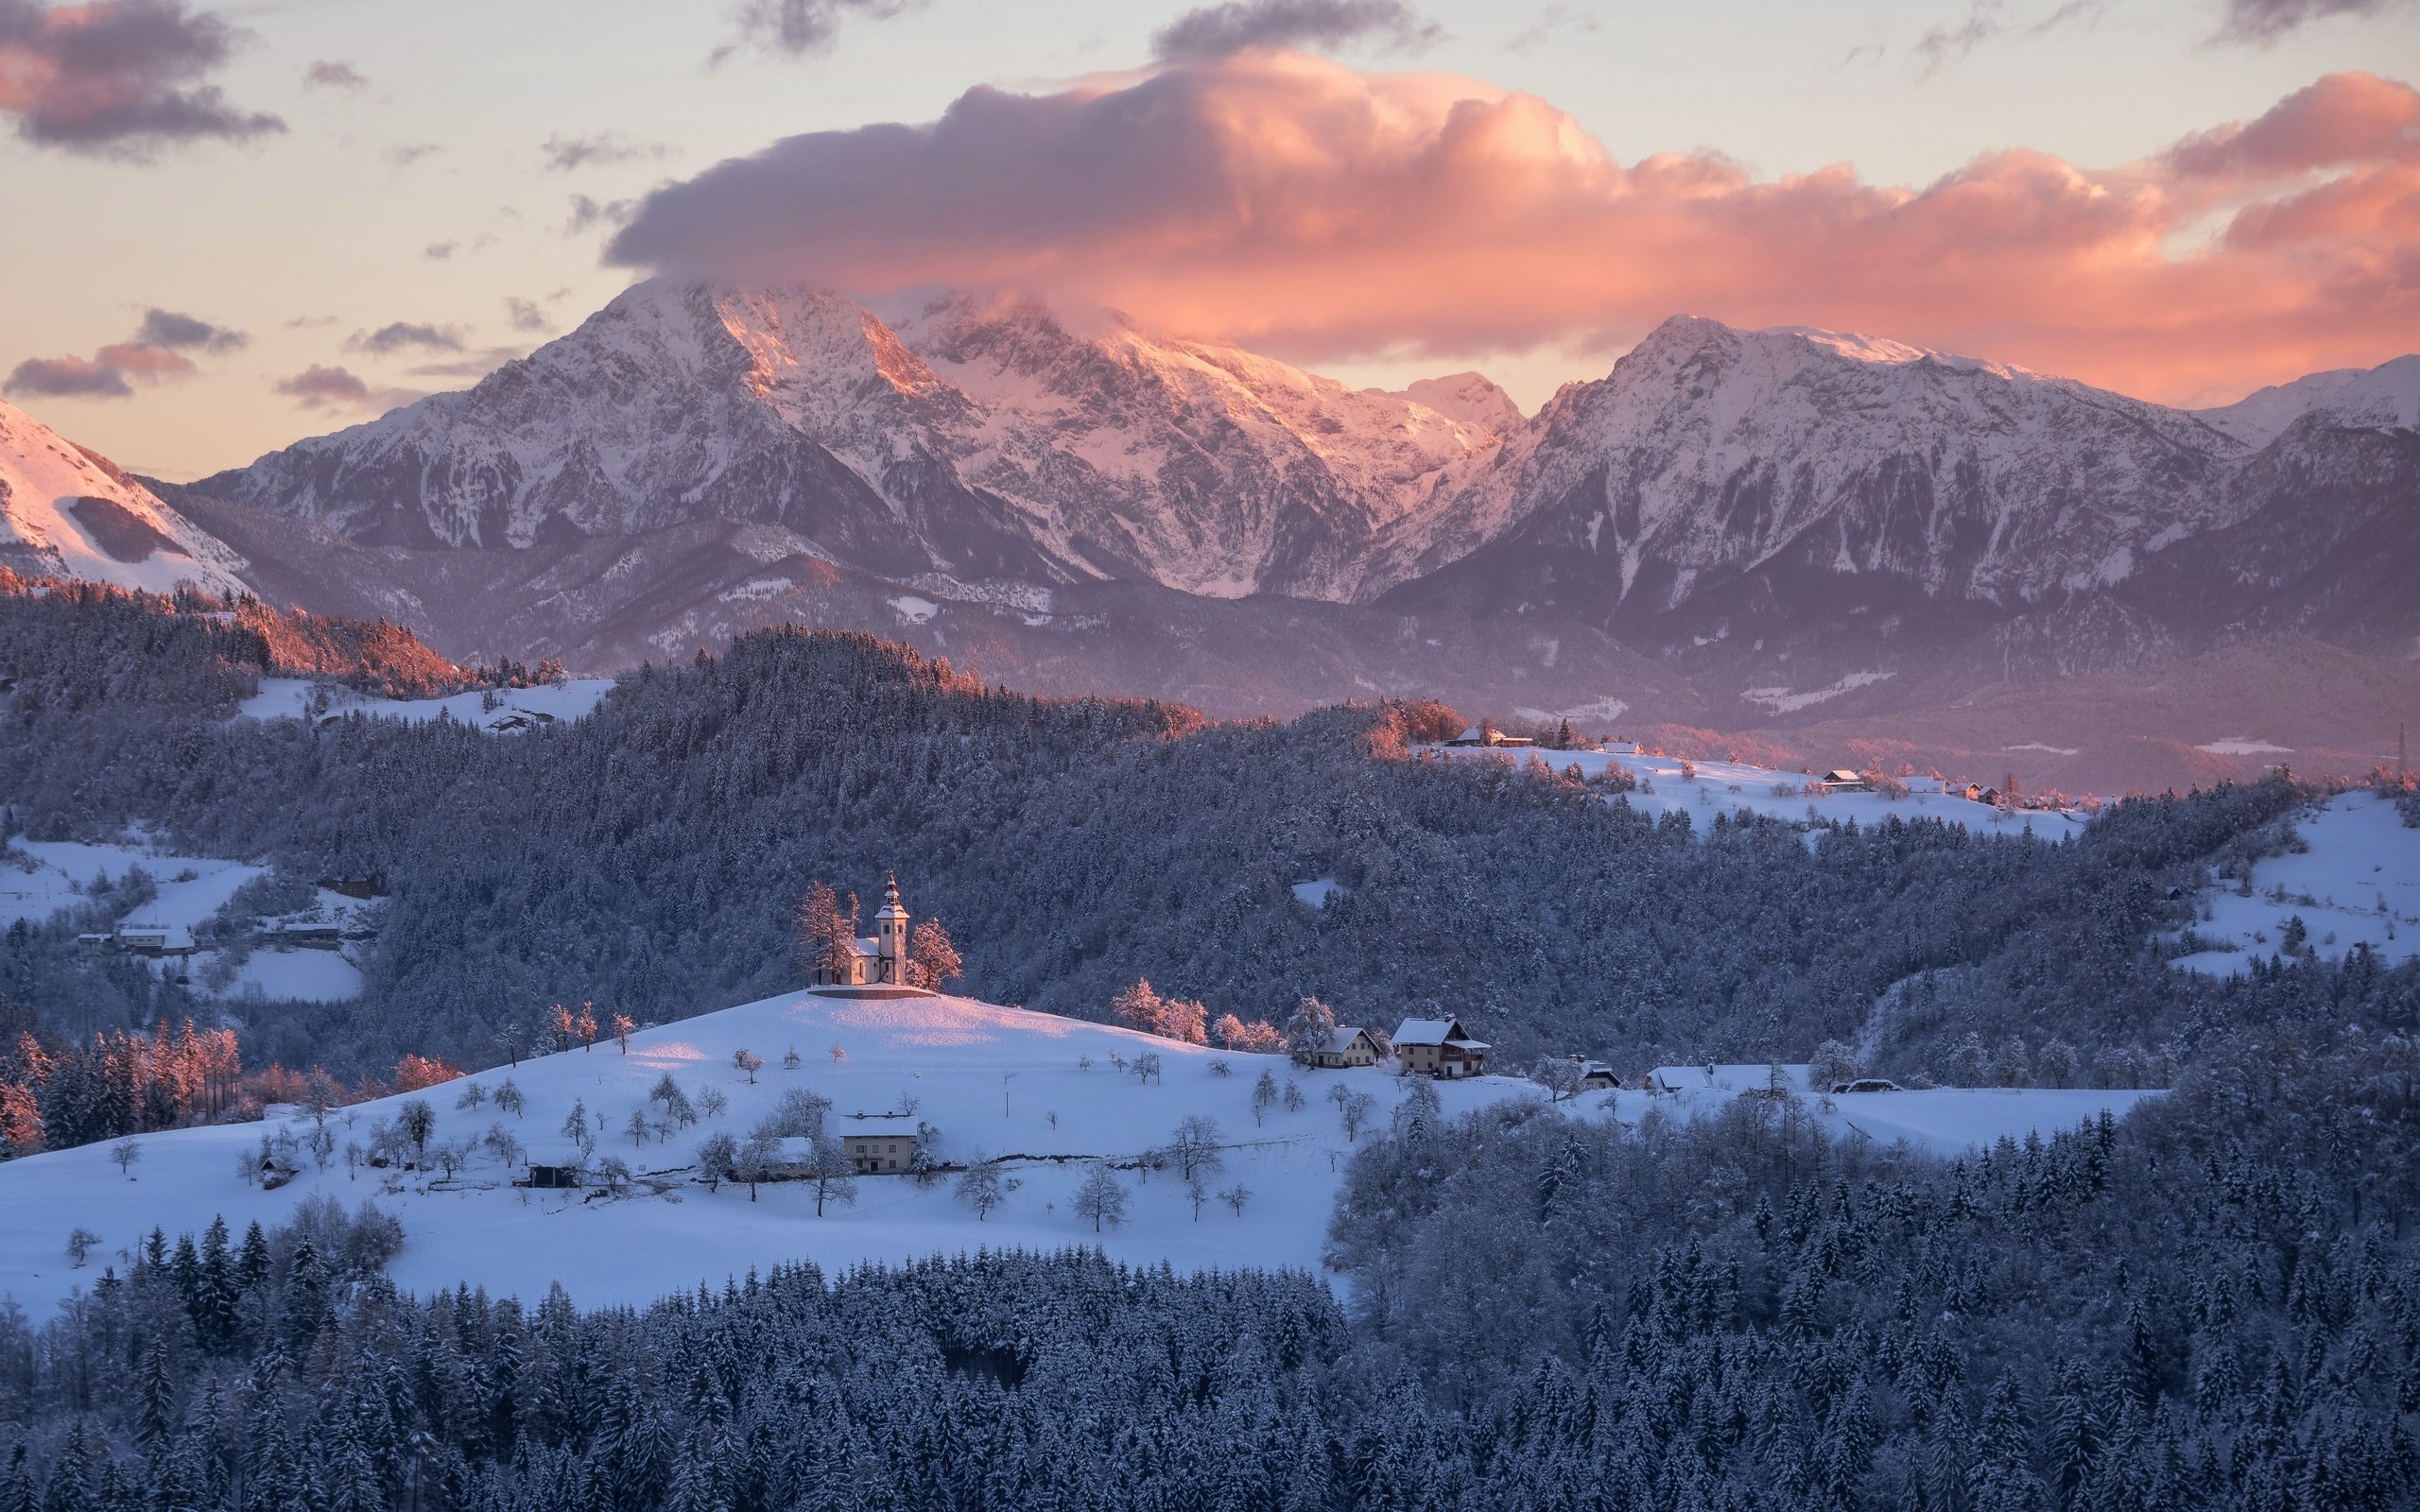 General 2560x1600 forest nature winter hills snow clouds sky landscape building house Slovenia mountains church